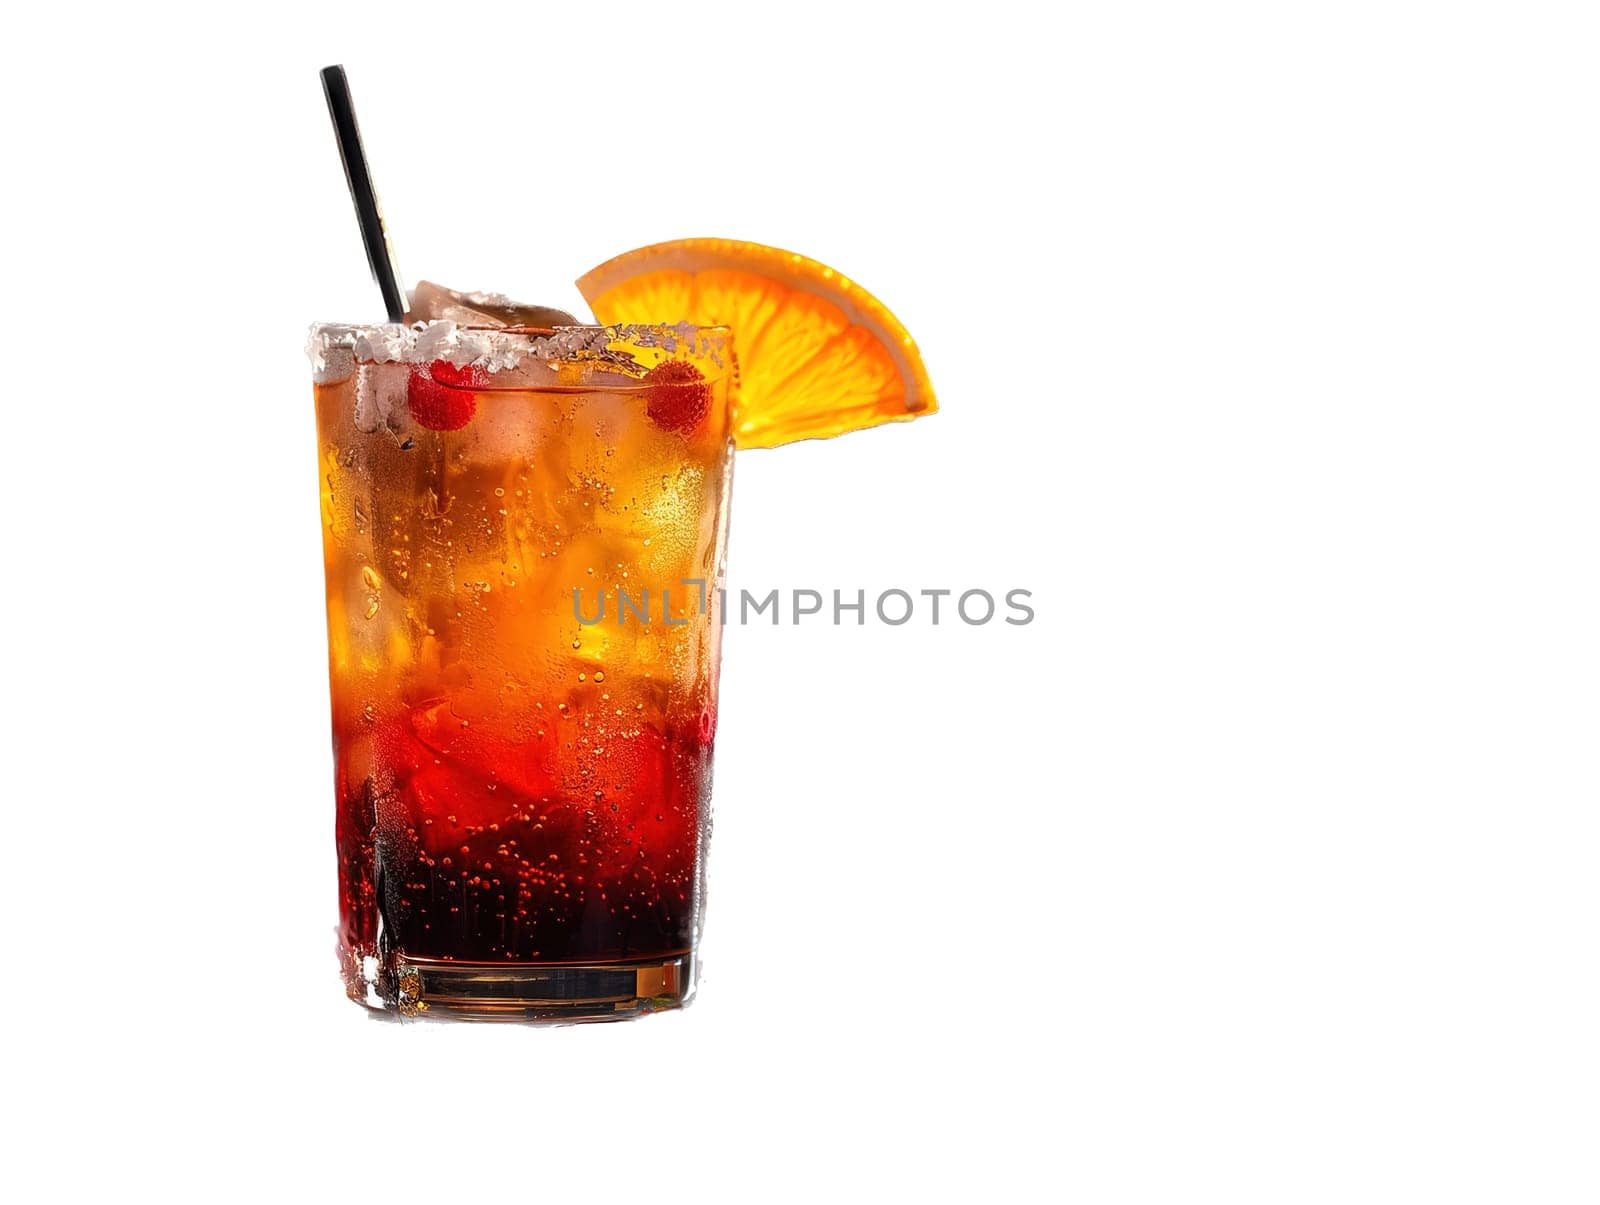 Delicious Tequila Sunrise cocktail photography, explosion flavors, studio lighting, studio background, well-lit, vibrant colors, sharp-focus, high-quality, artistic, unique. Tequila Sunrise Cocktail in vintage glass by mr-tigga